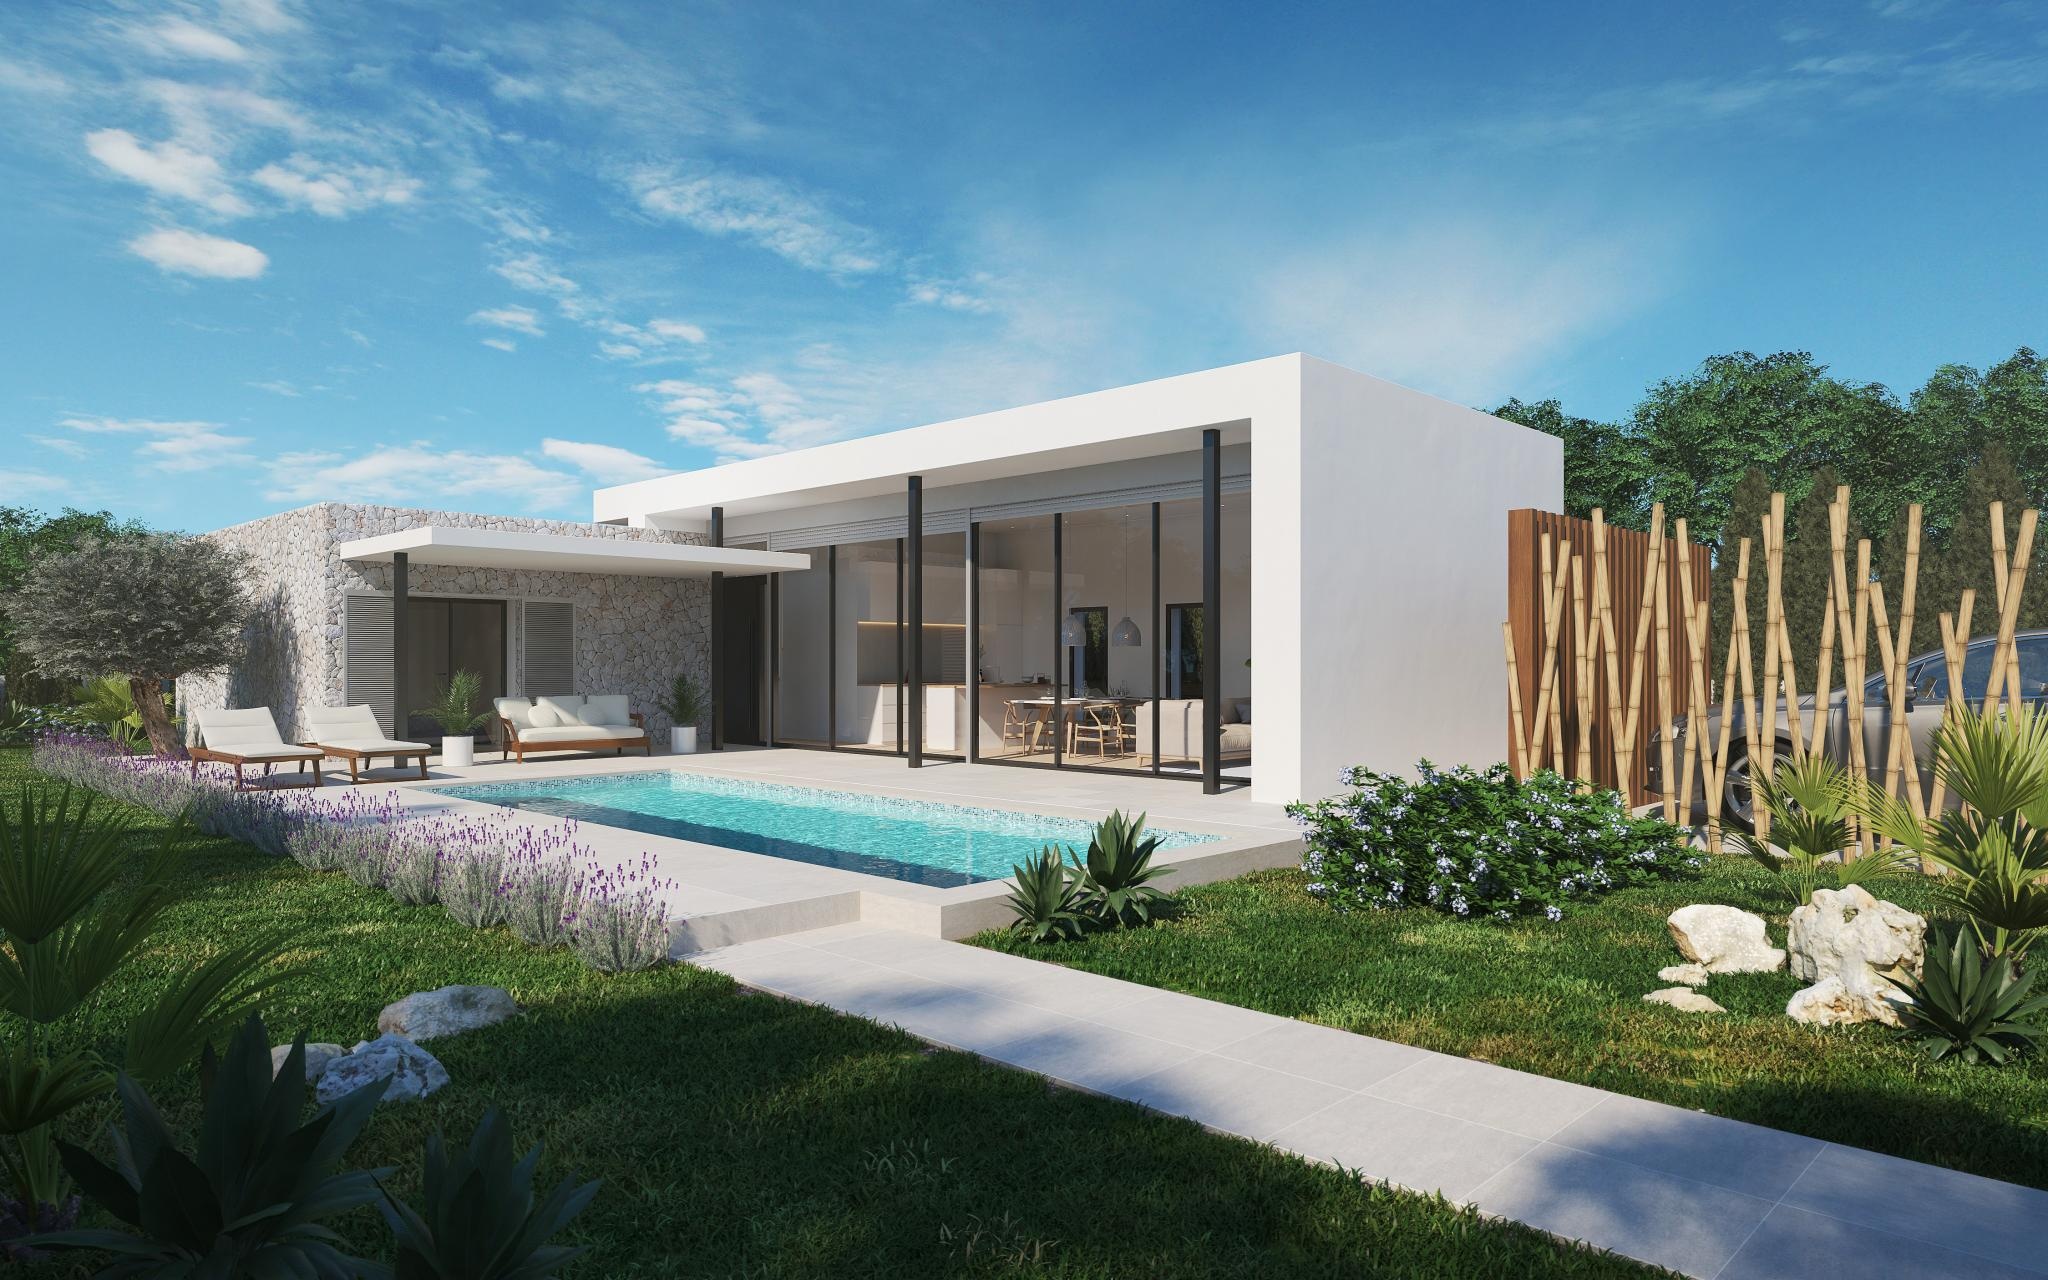 Bungalow: A modern country house near the beach of Es Trenc, Spanish Majorca. 2050x1280 HD Wallpaper.